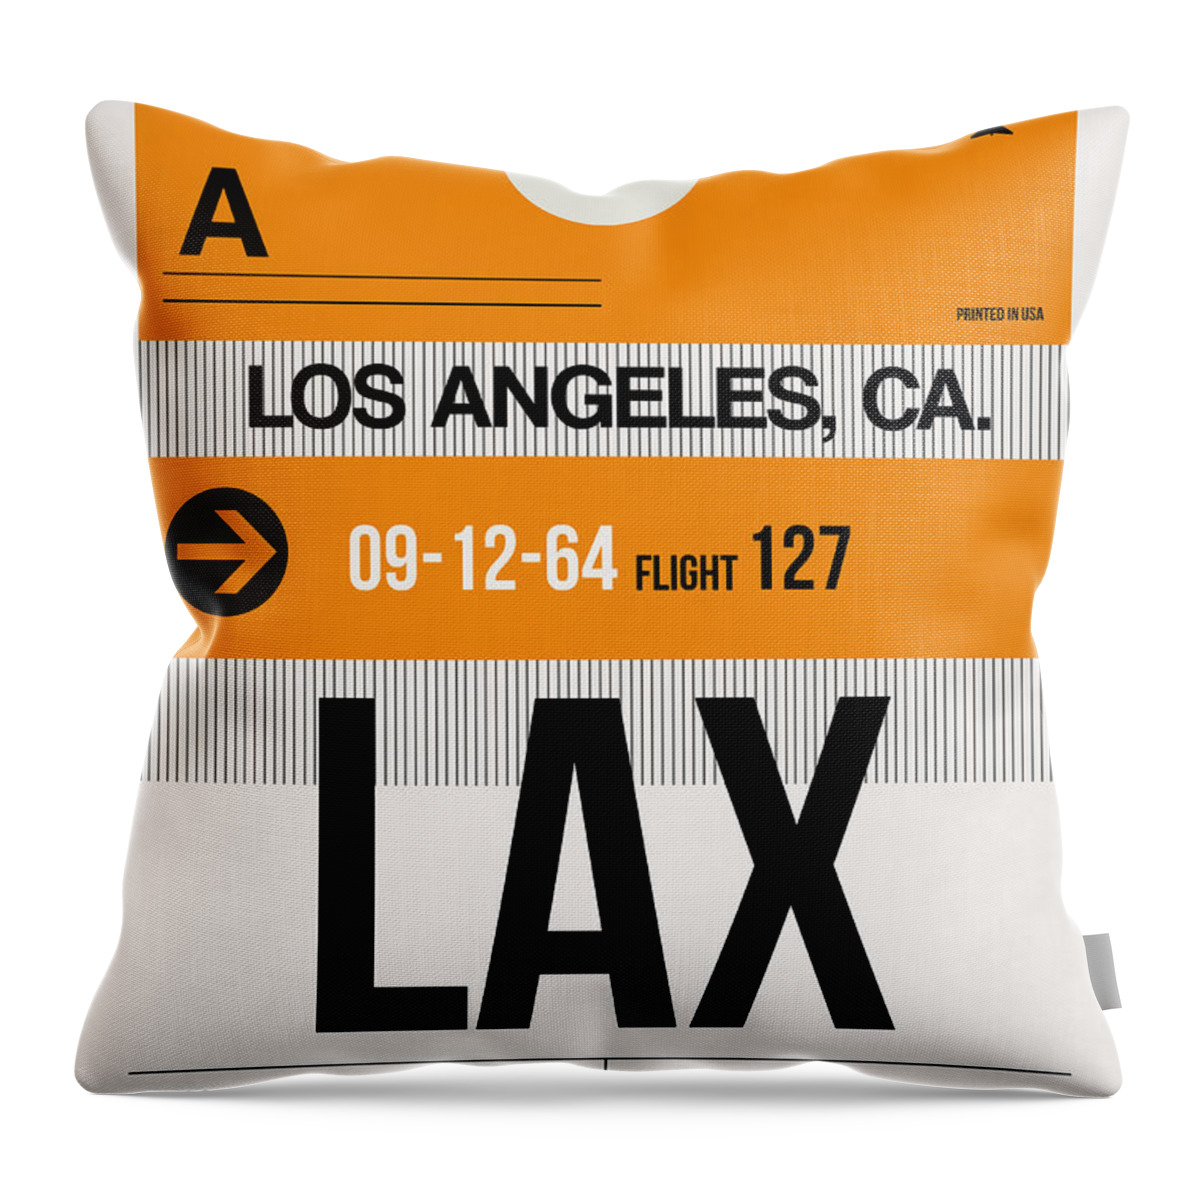  Throw Pillow featuring the digital art Los Angeles Luggage Poster 2 by Naxart Studio